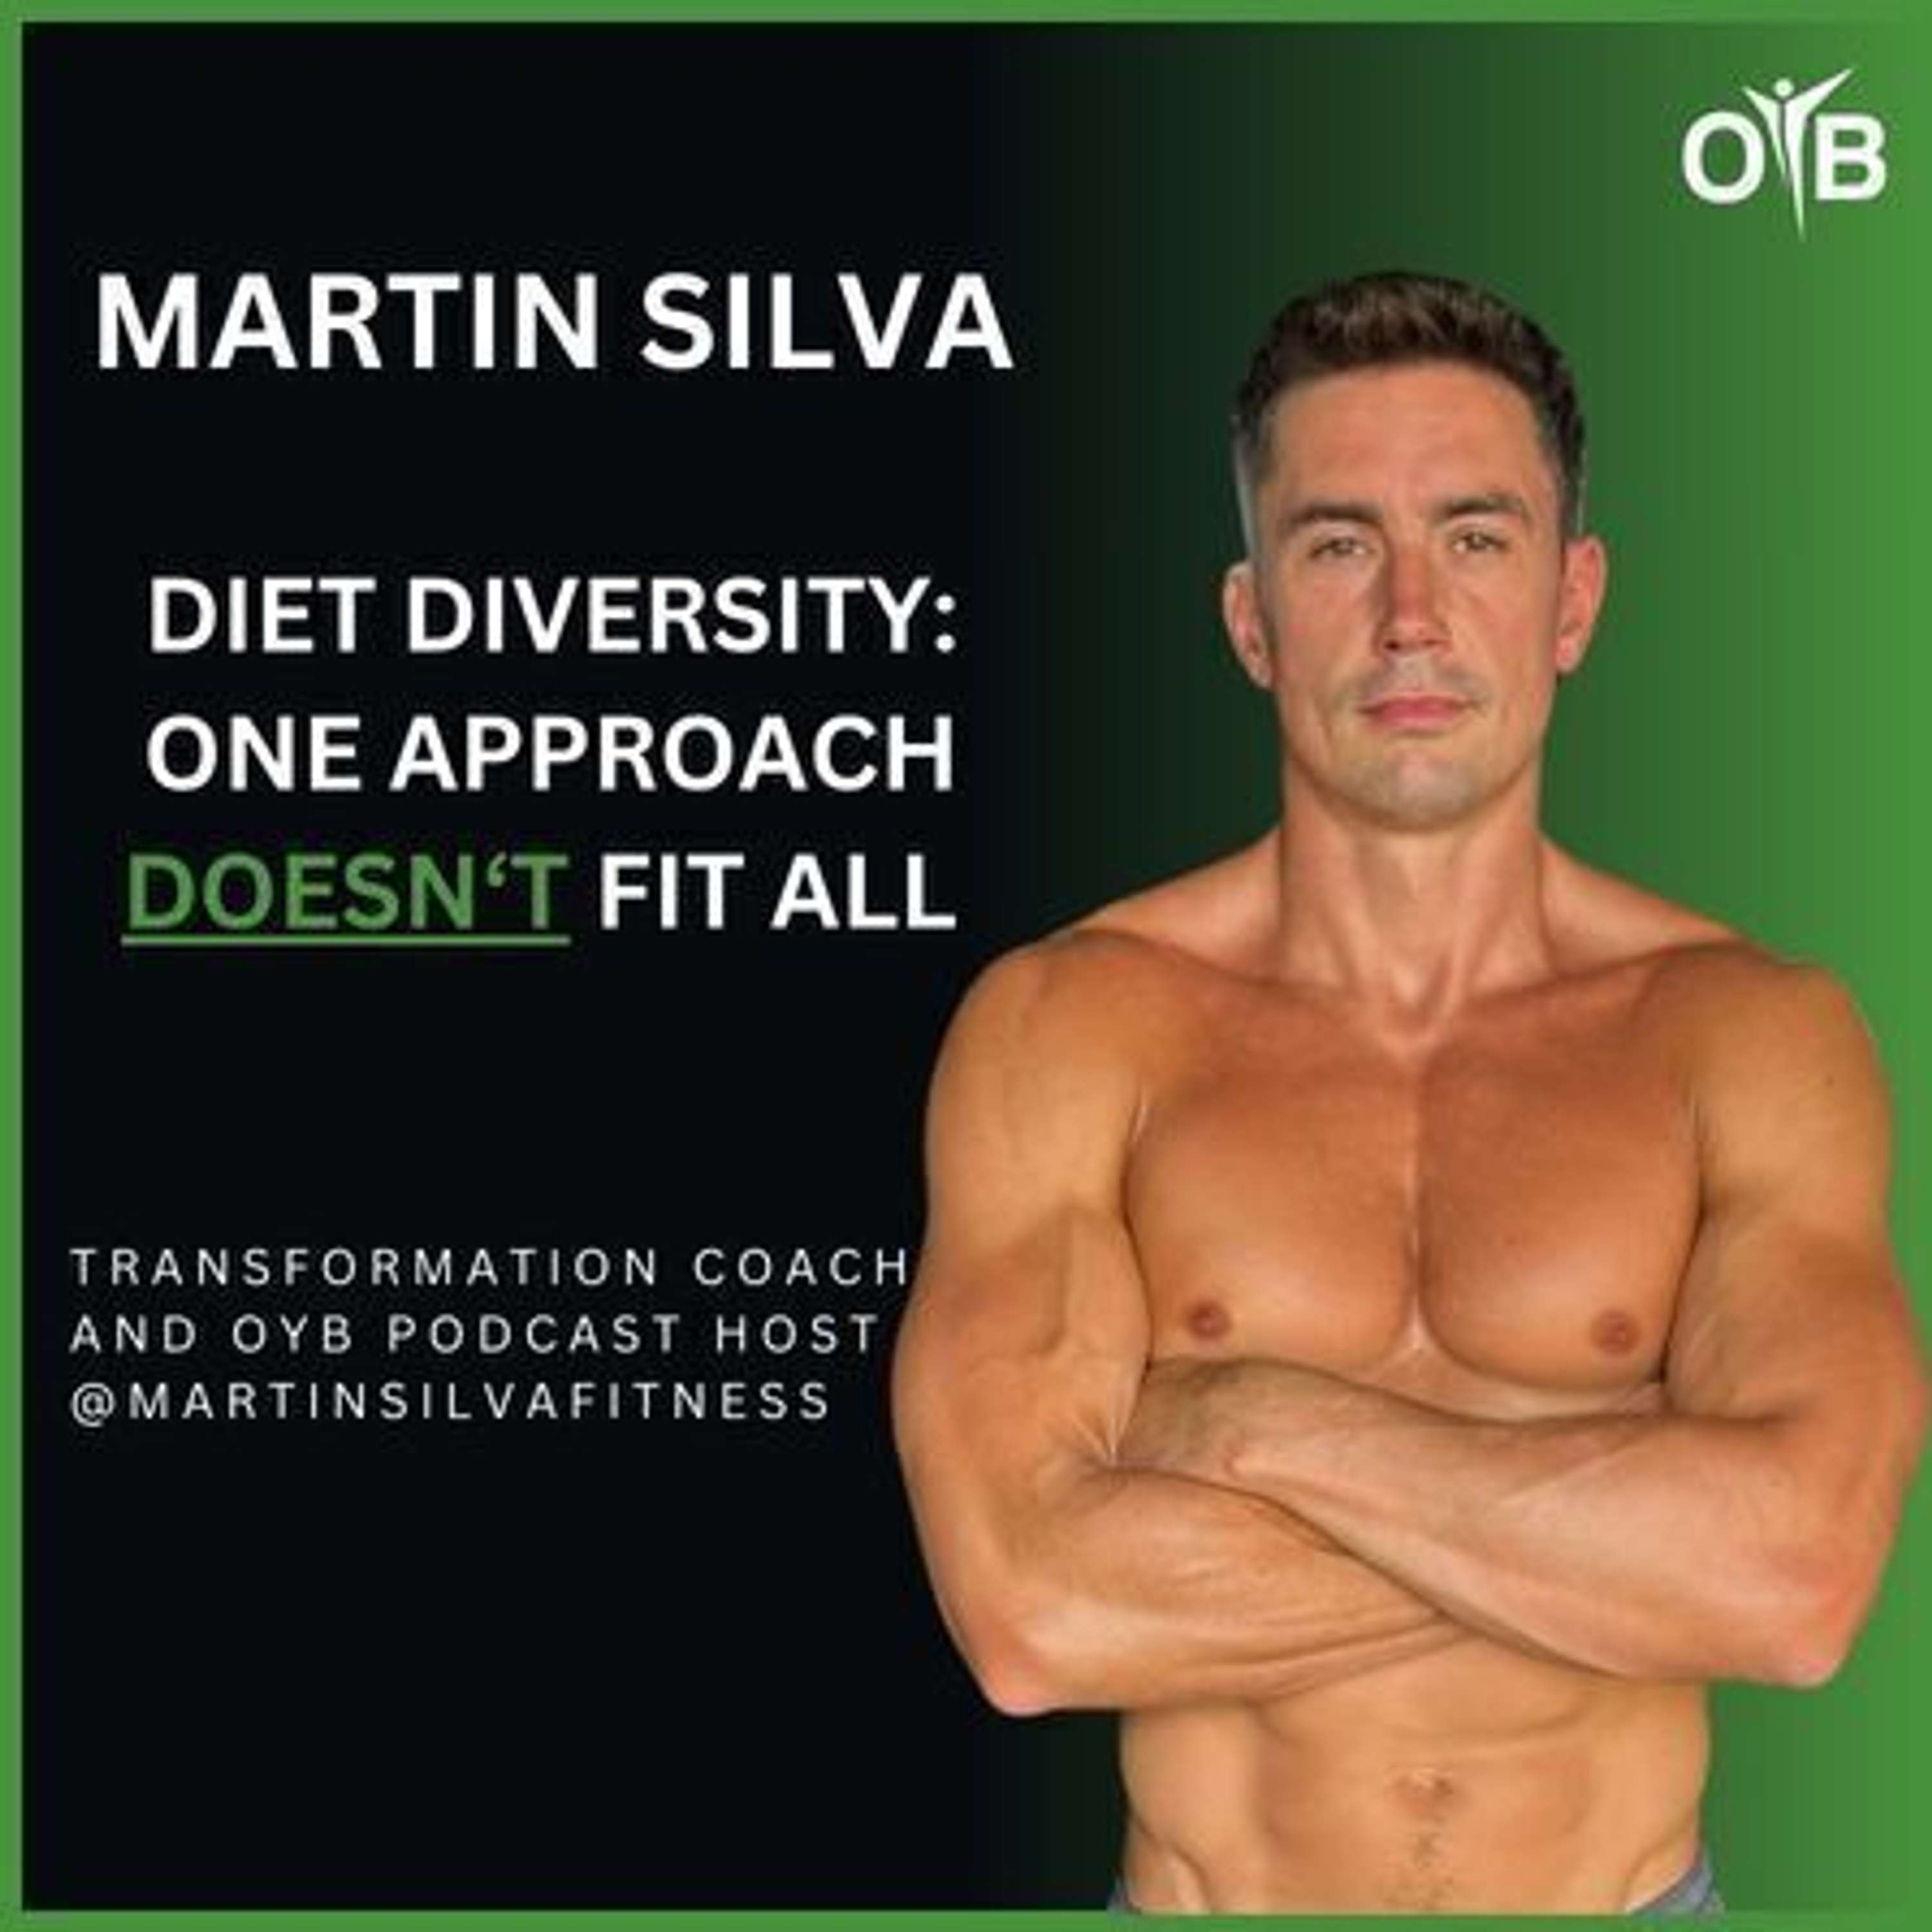 Diet Diversity: One Approach Doesn't Fit All